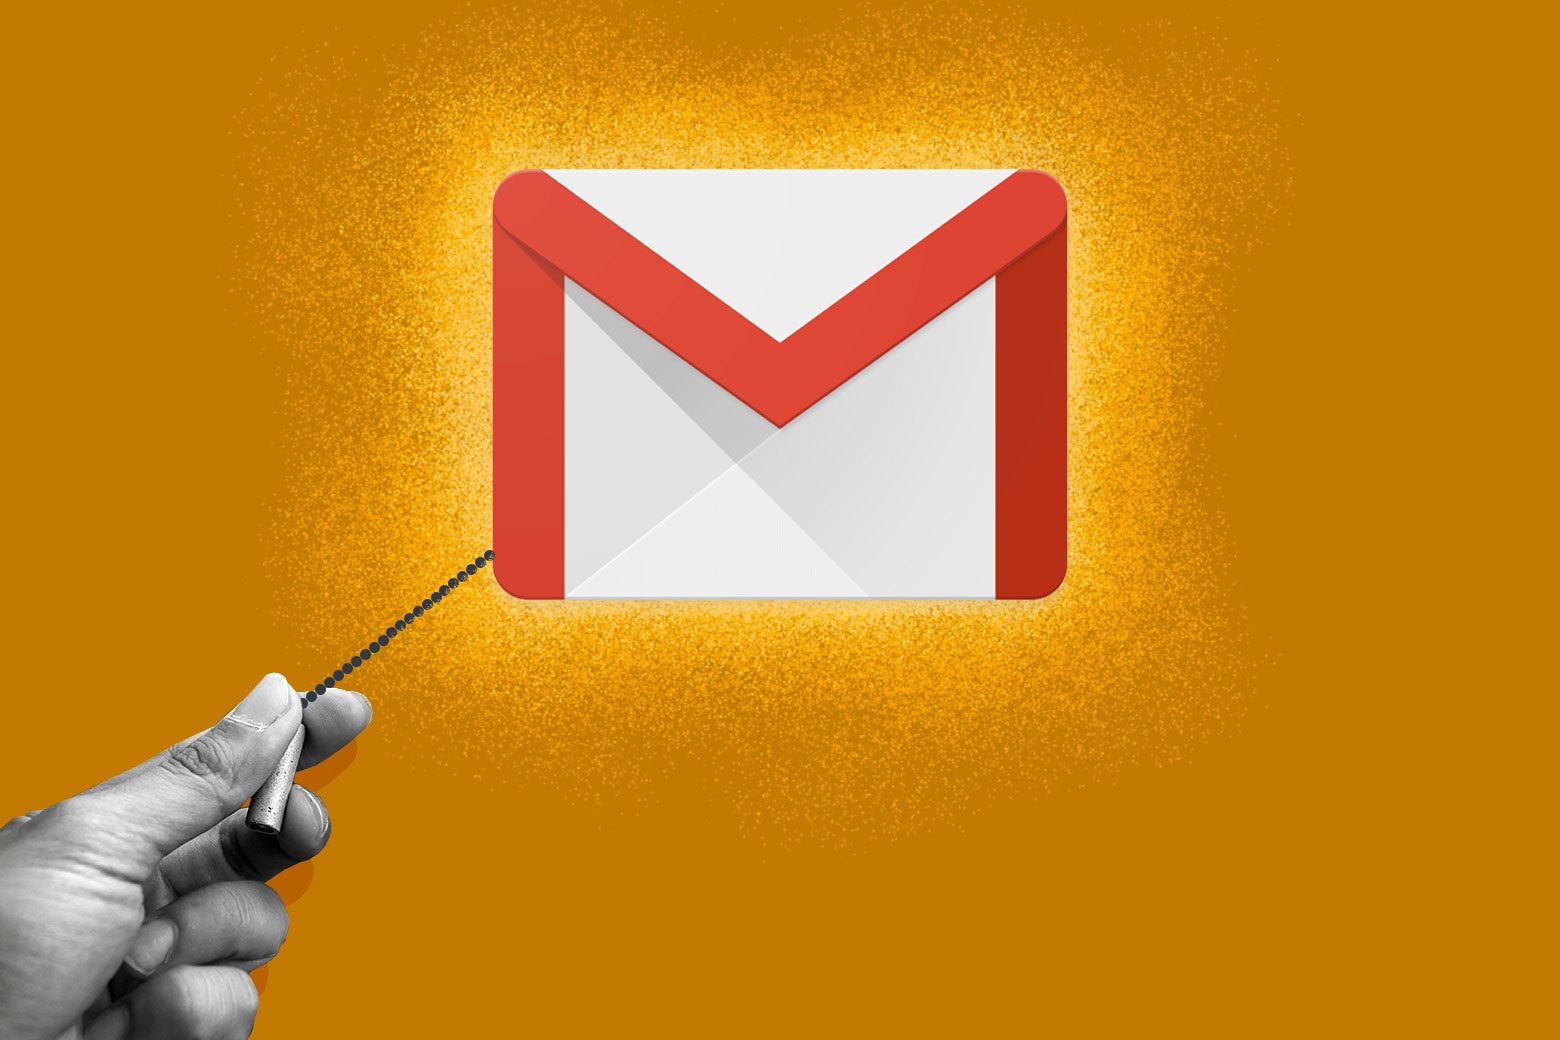 A hand pulls a lamp cord on a Gmail logo.